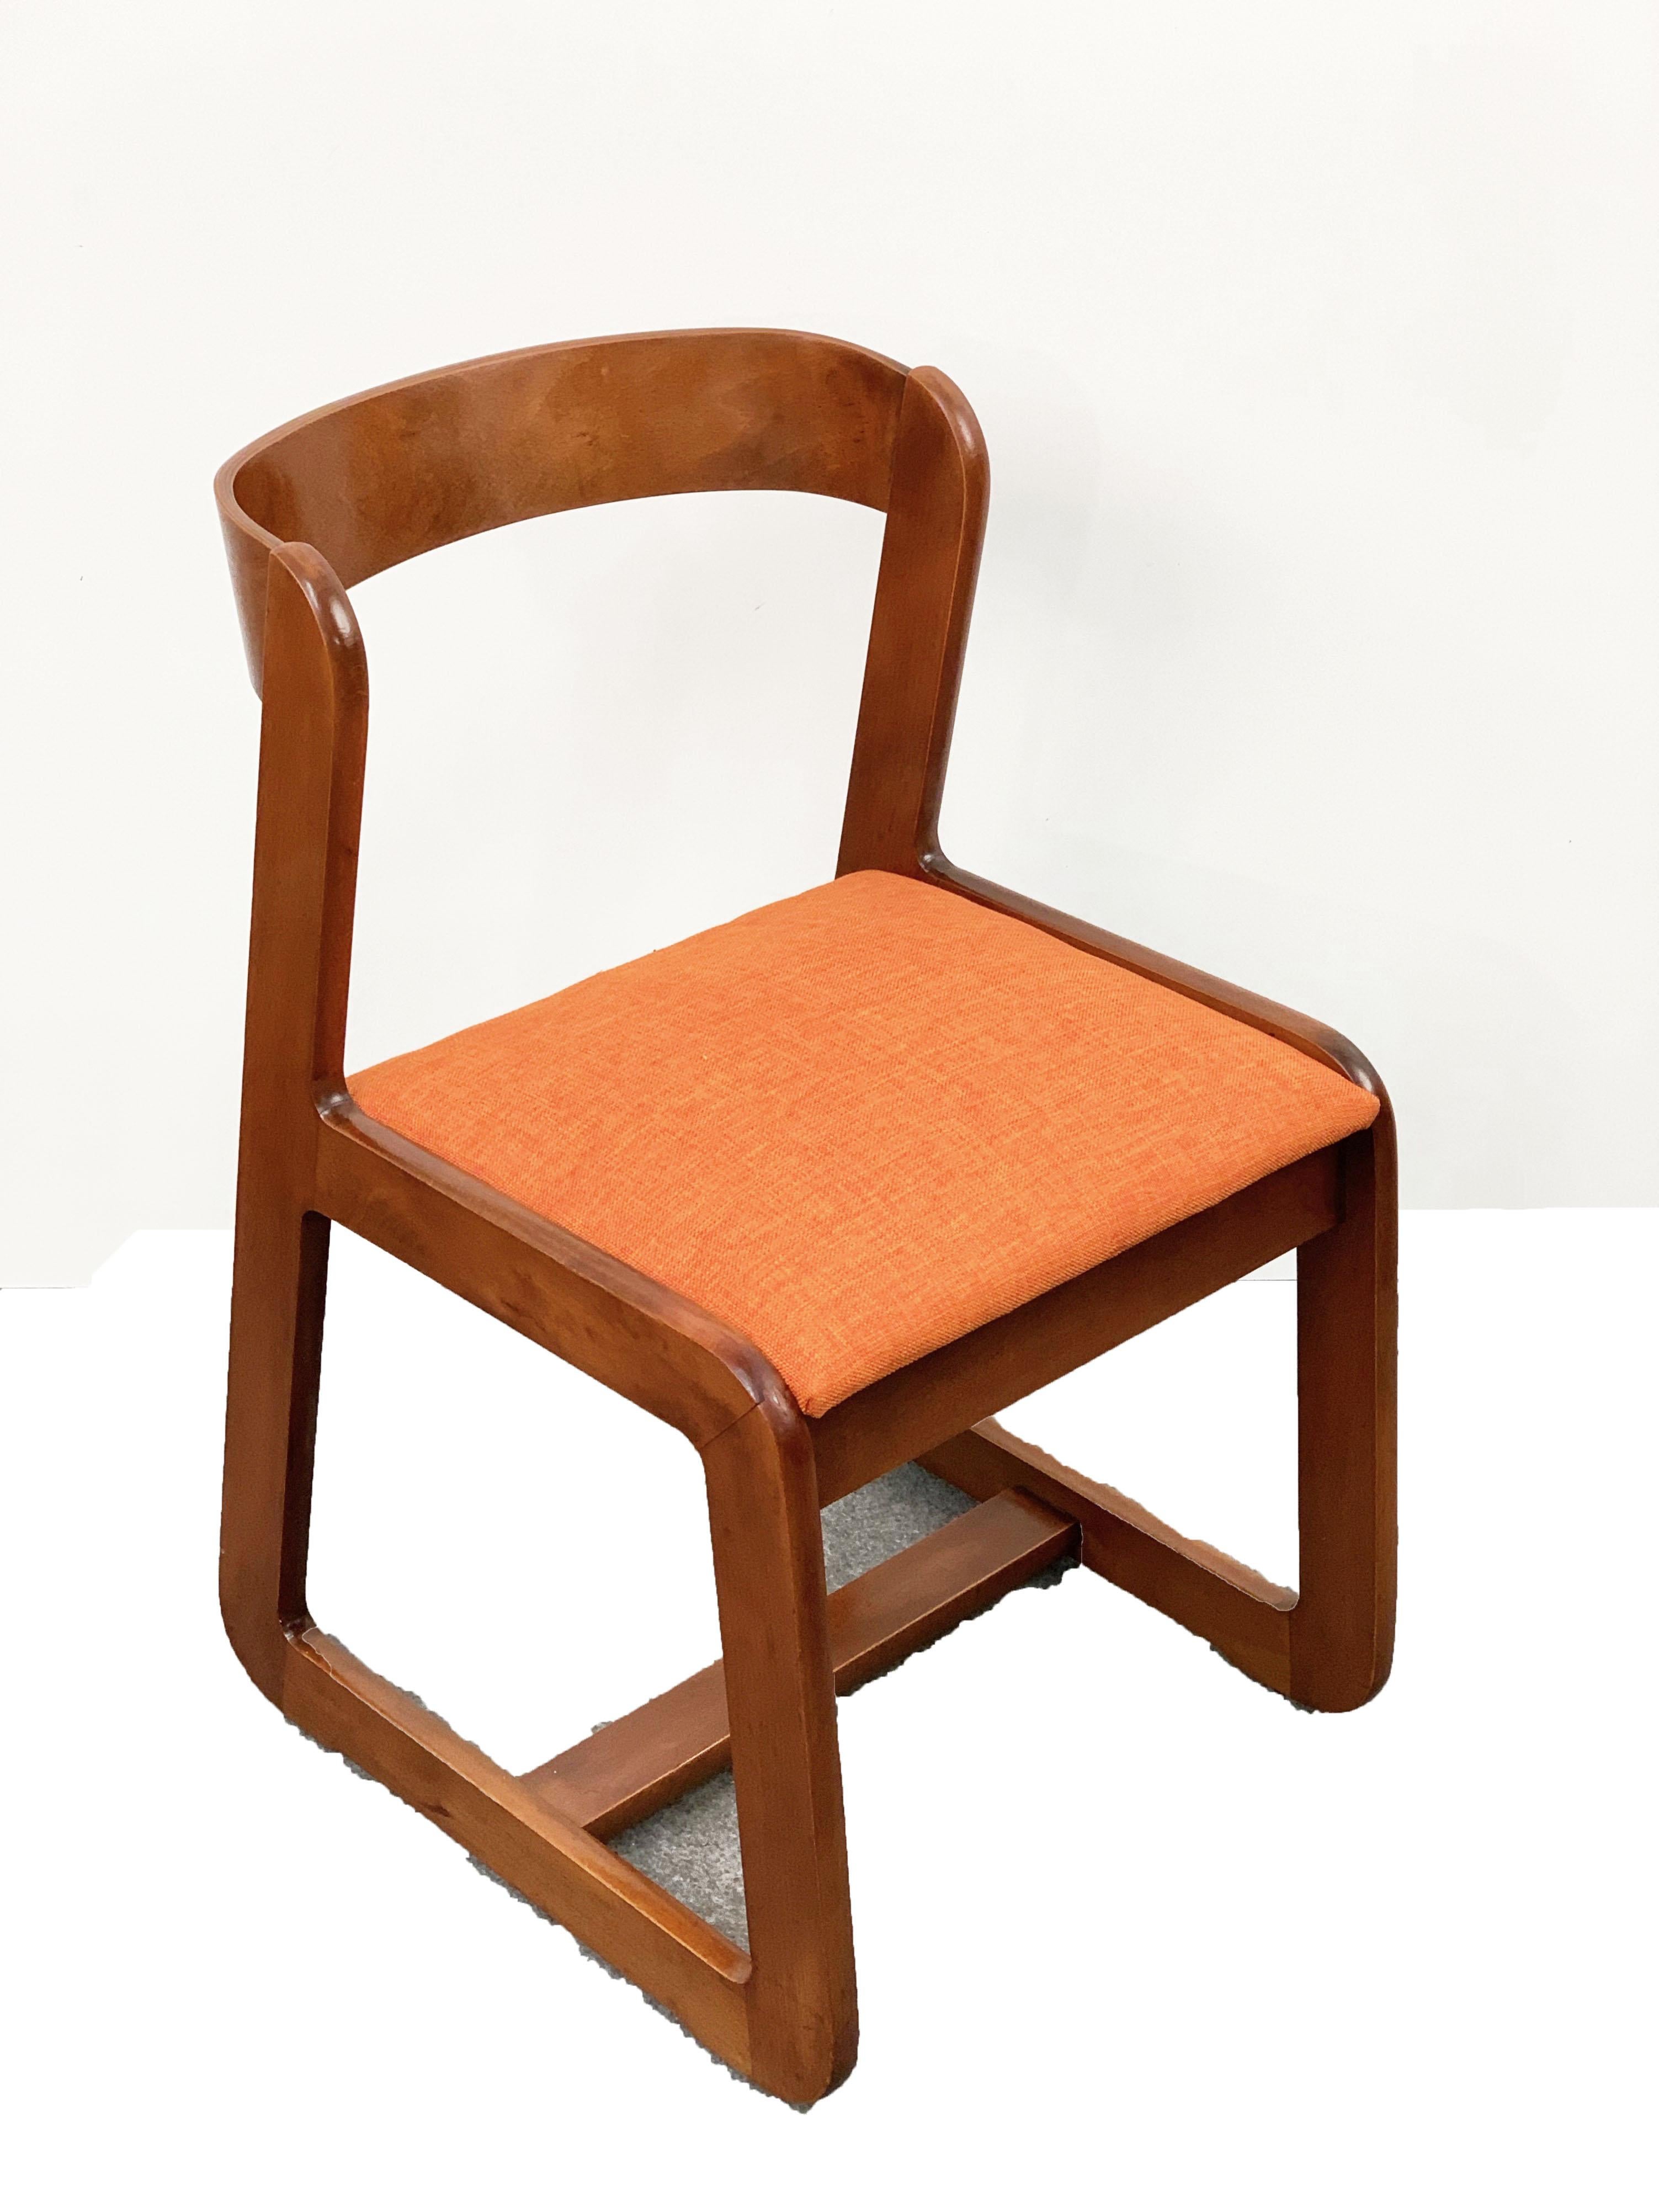 Willy Rizzo Midcentury Italian Wooden and Orange Fabric Chairs, Mario Sabot 1970 2